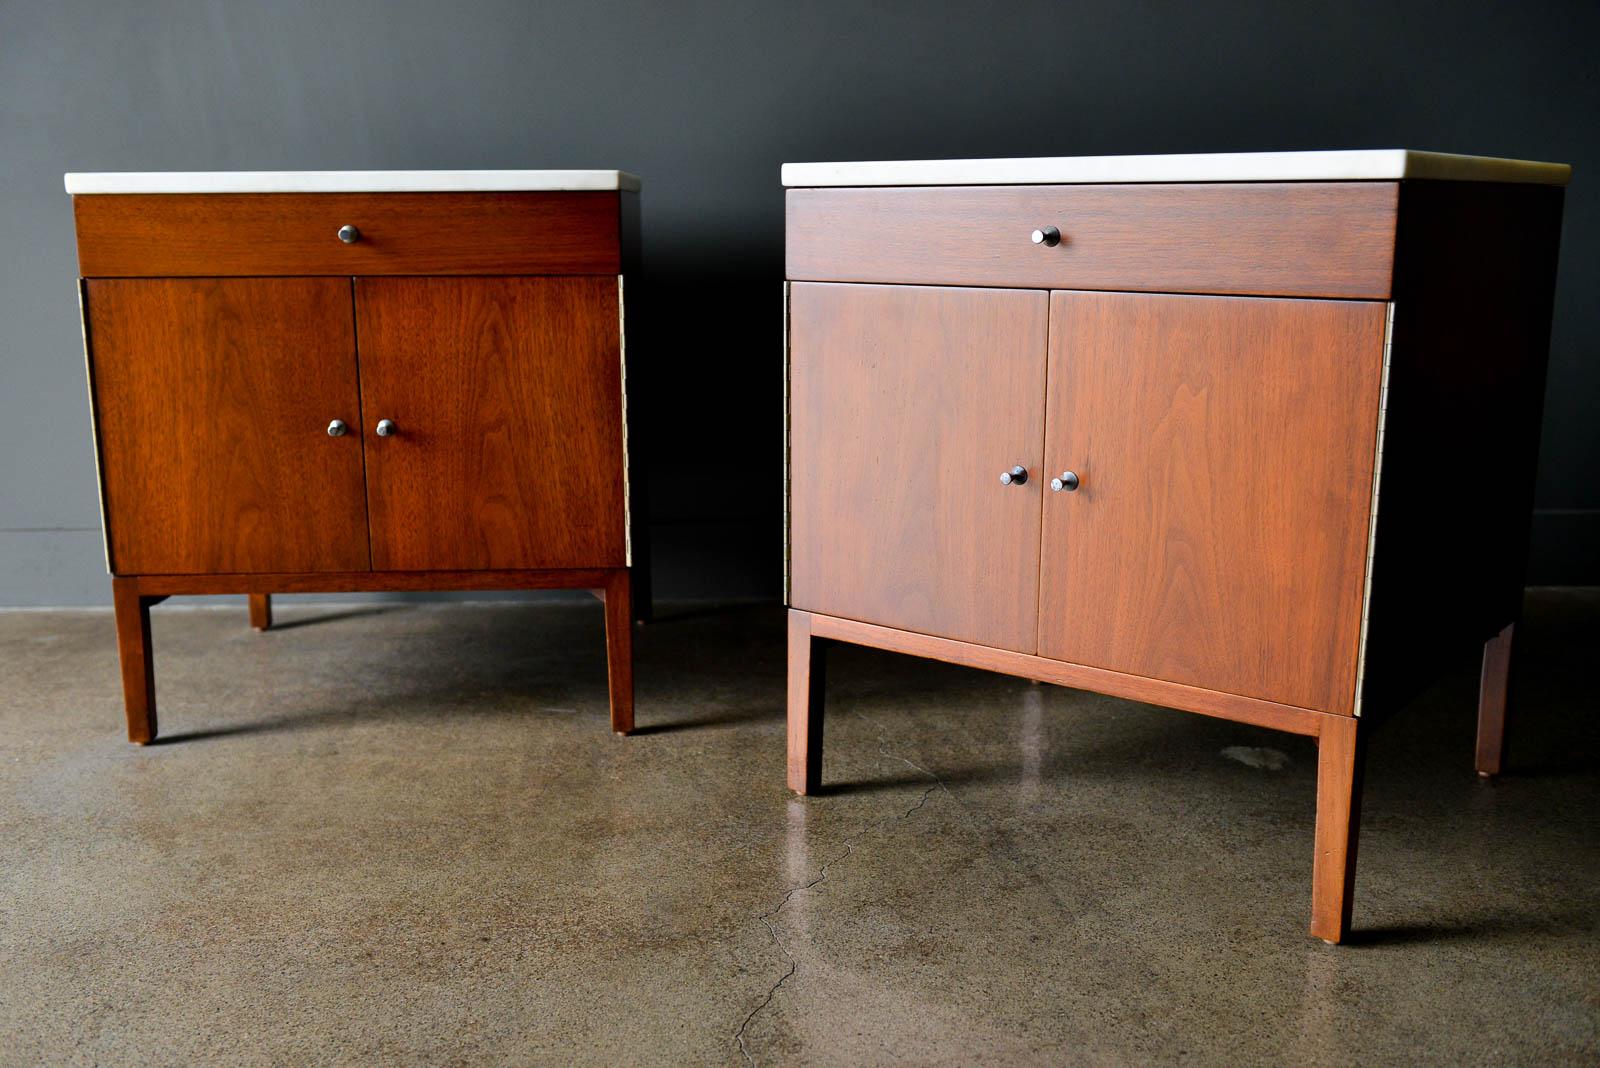 Pair of Paul McCobb for Calvin Furniture walnut and marble nightstands or end tables, circa 1960. Beautiful walnut grain restored in very good condition with original white marble tops. Inner shelf is adjustable or removable and drawers are lined in